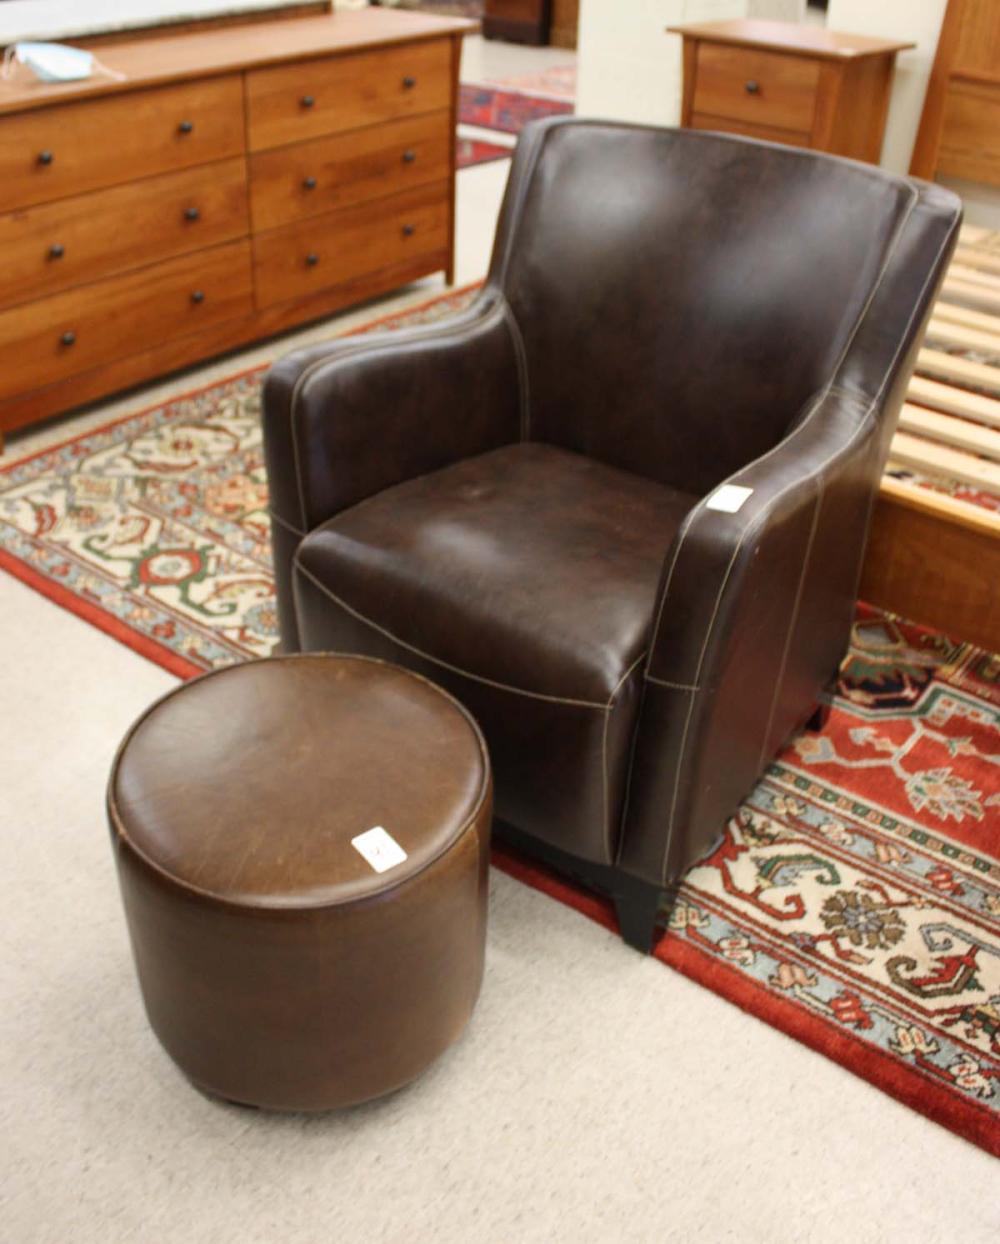 CONTEMPORARY LEATHER ARMCHAIR AND 33ec8c